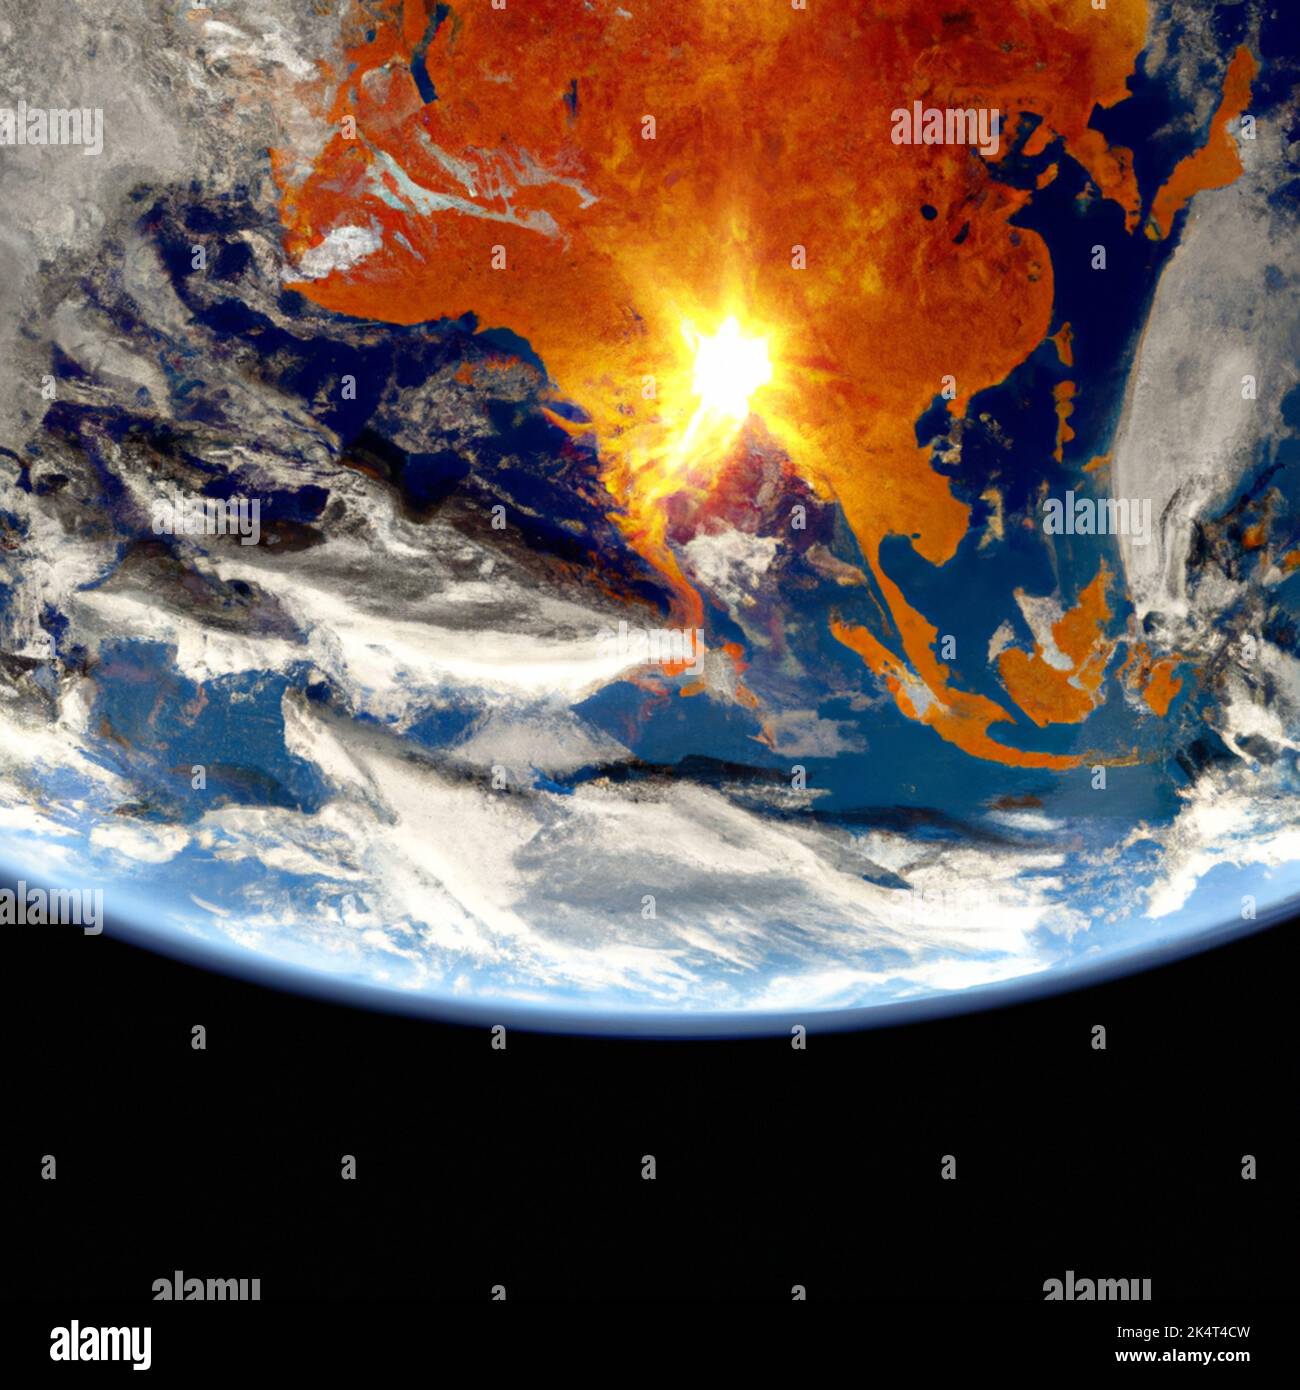 France, Paris on 26/09/2022. Digital illustration of global warming and fires on the planet Earth. Image created using an artificial intelligence prog Stock Photo